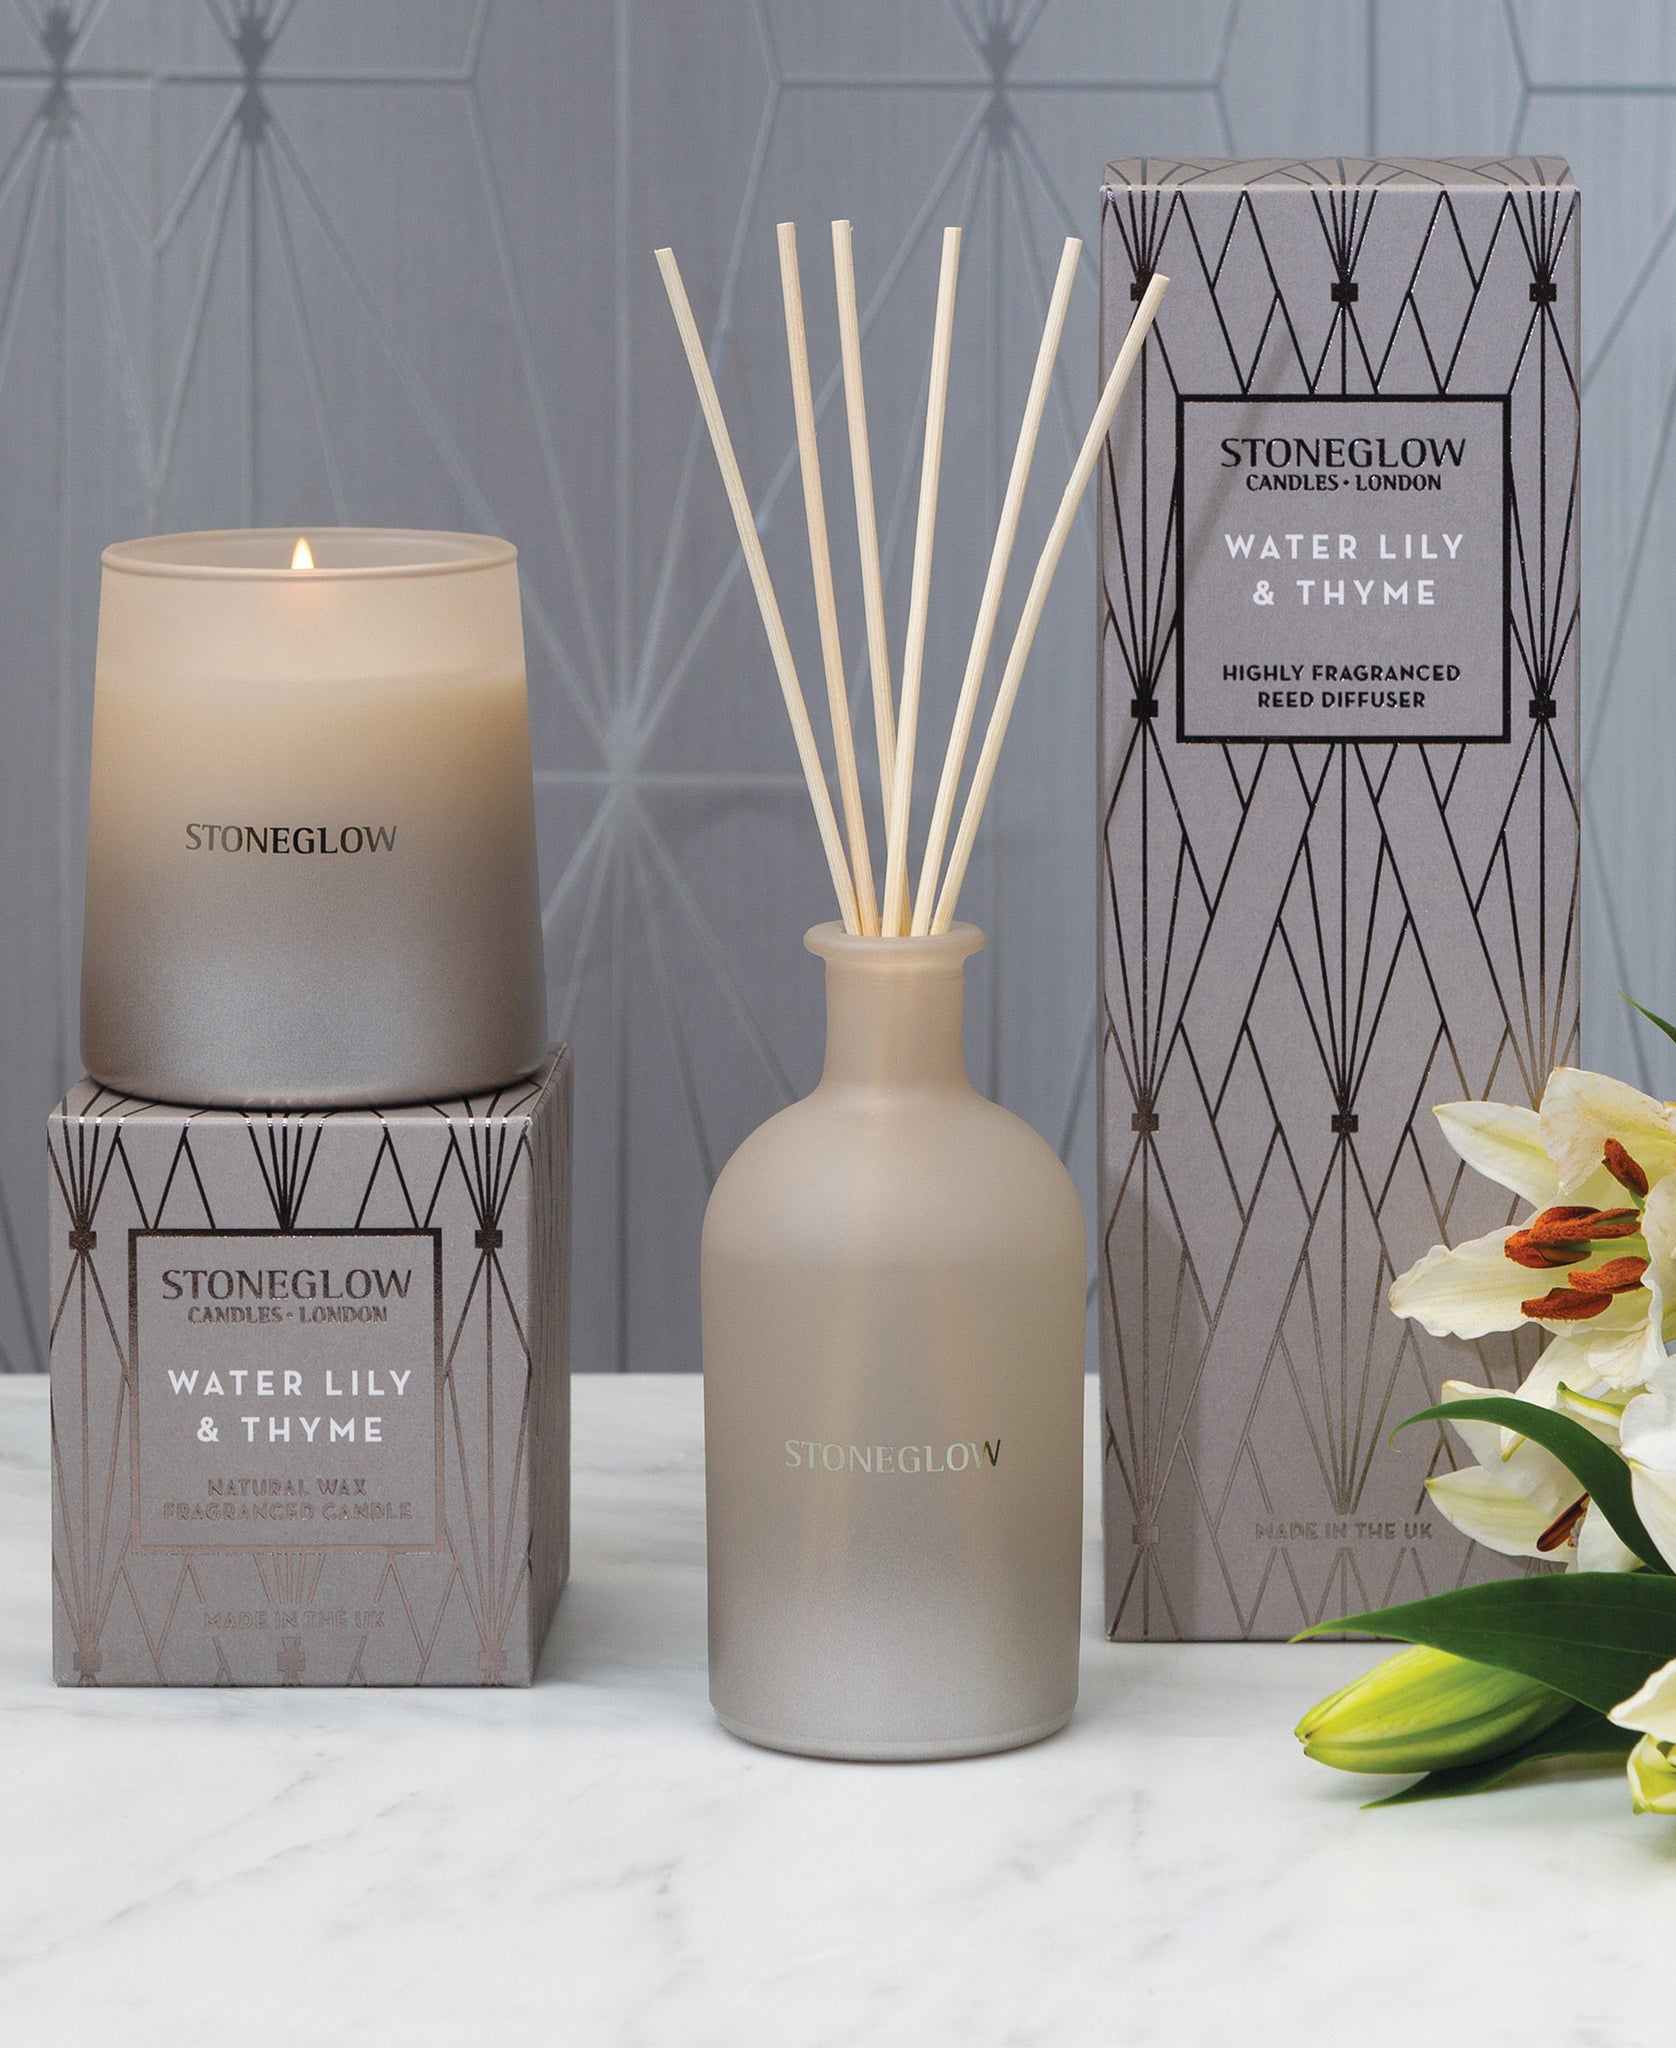 Stoneglow Water Lily & Thyme Diffuser